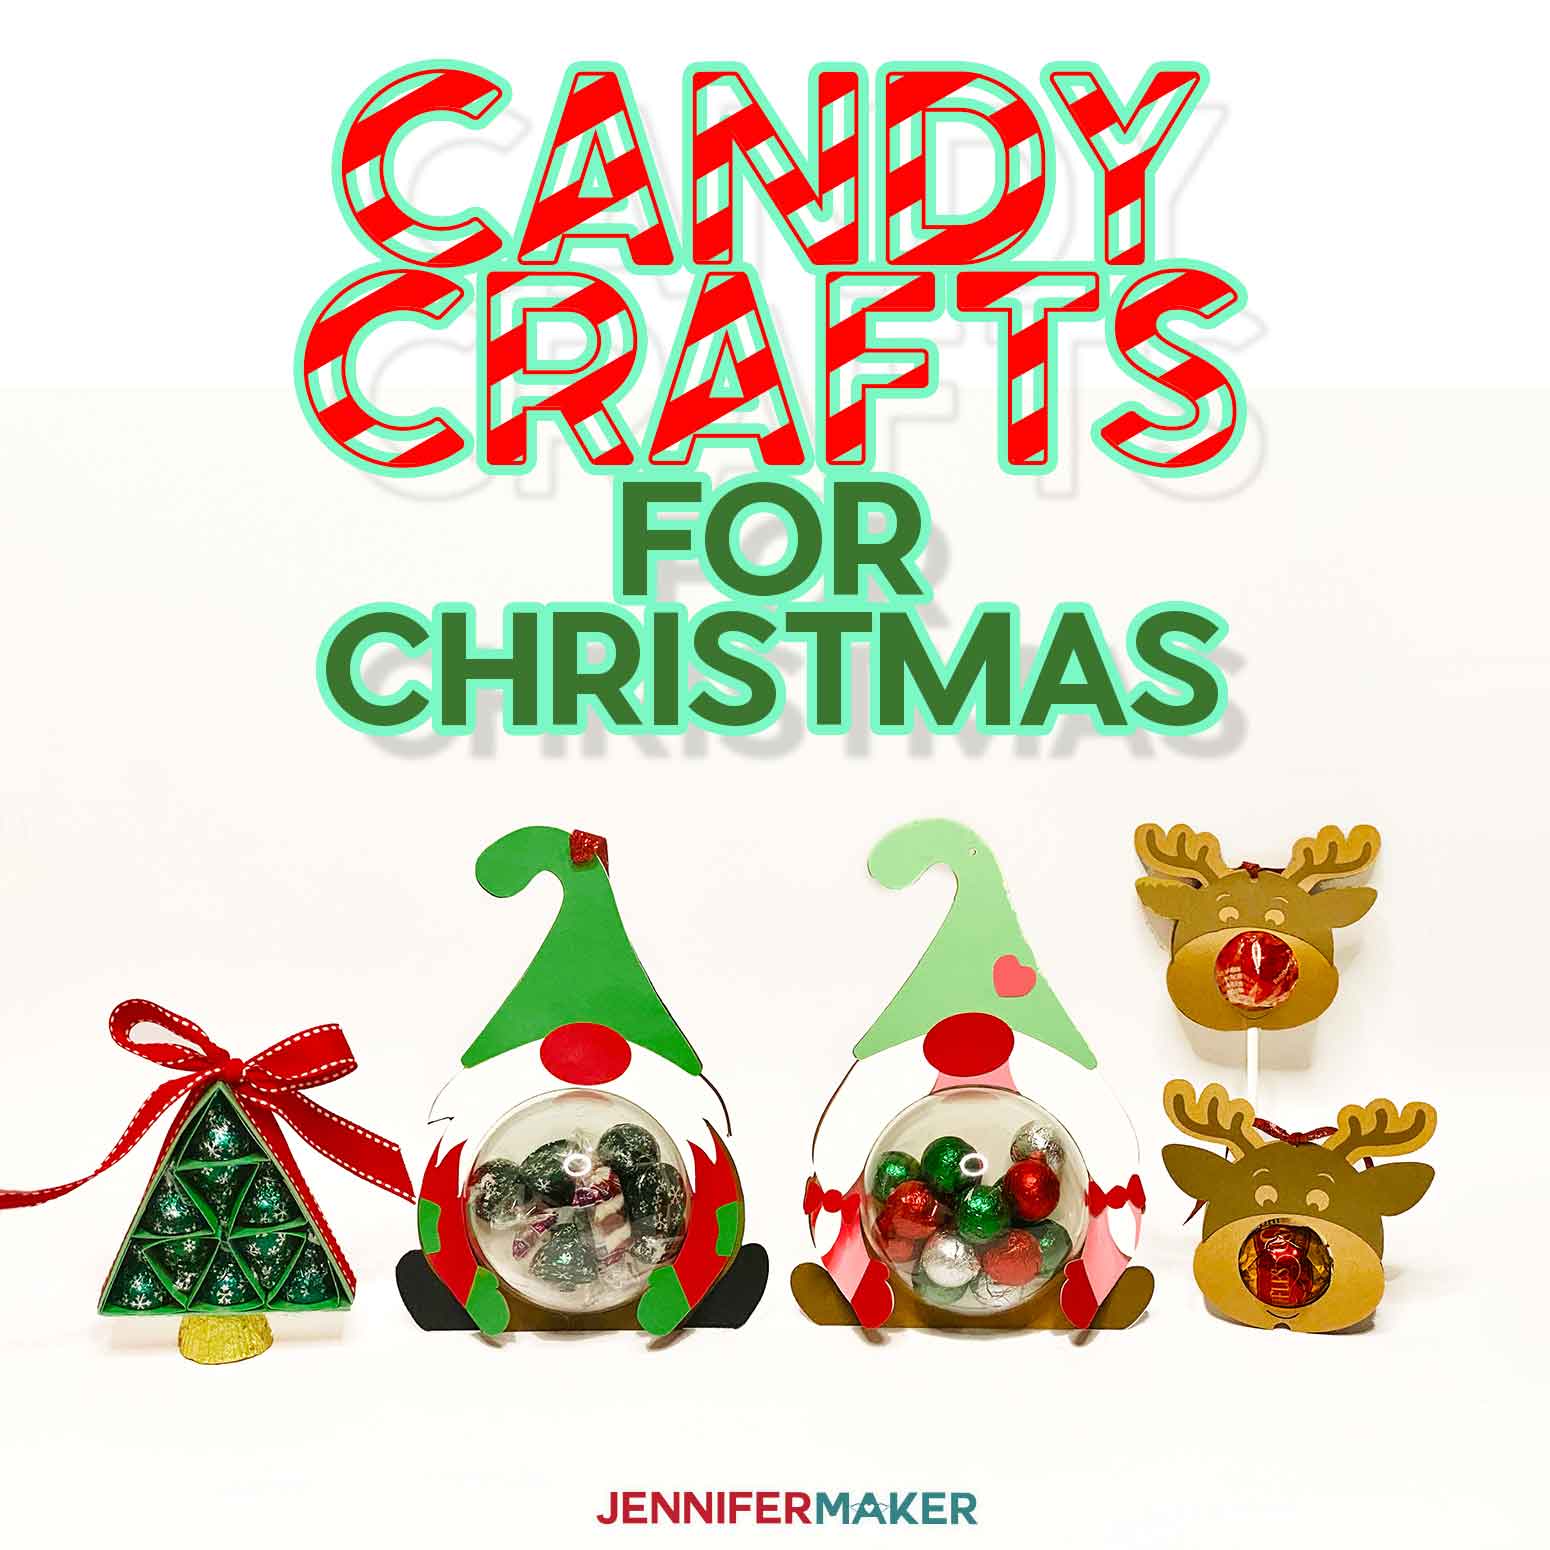 Candy Crafts for Christmas: Gnomes, Reindeer, & Tree!